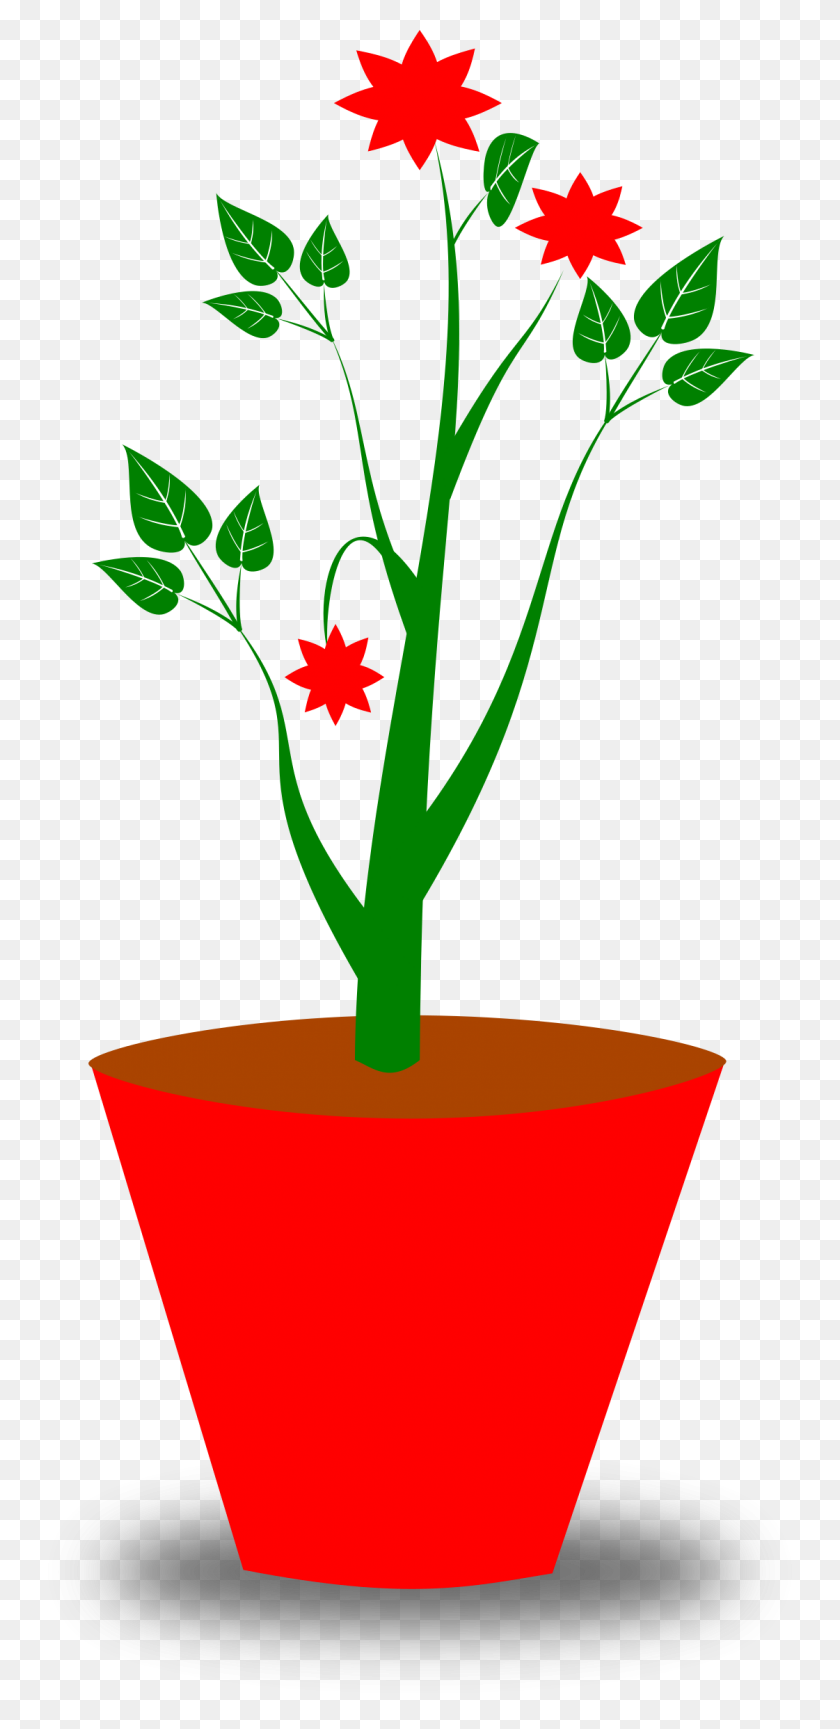 Vase Drawing Computer Icons Cartoon Flowerpot - Flowers In Vase Clipart